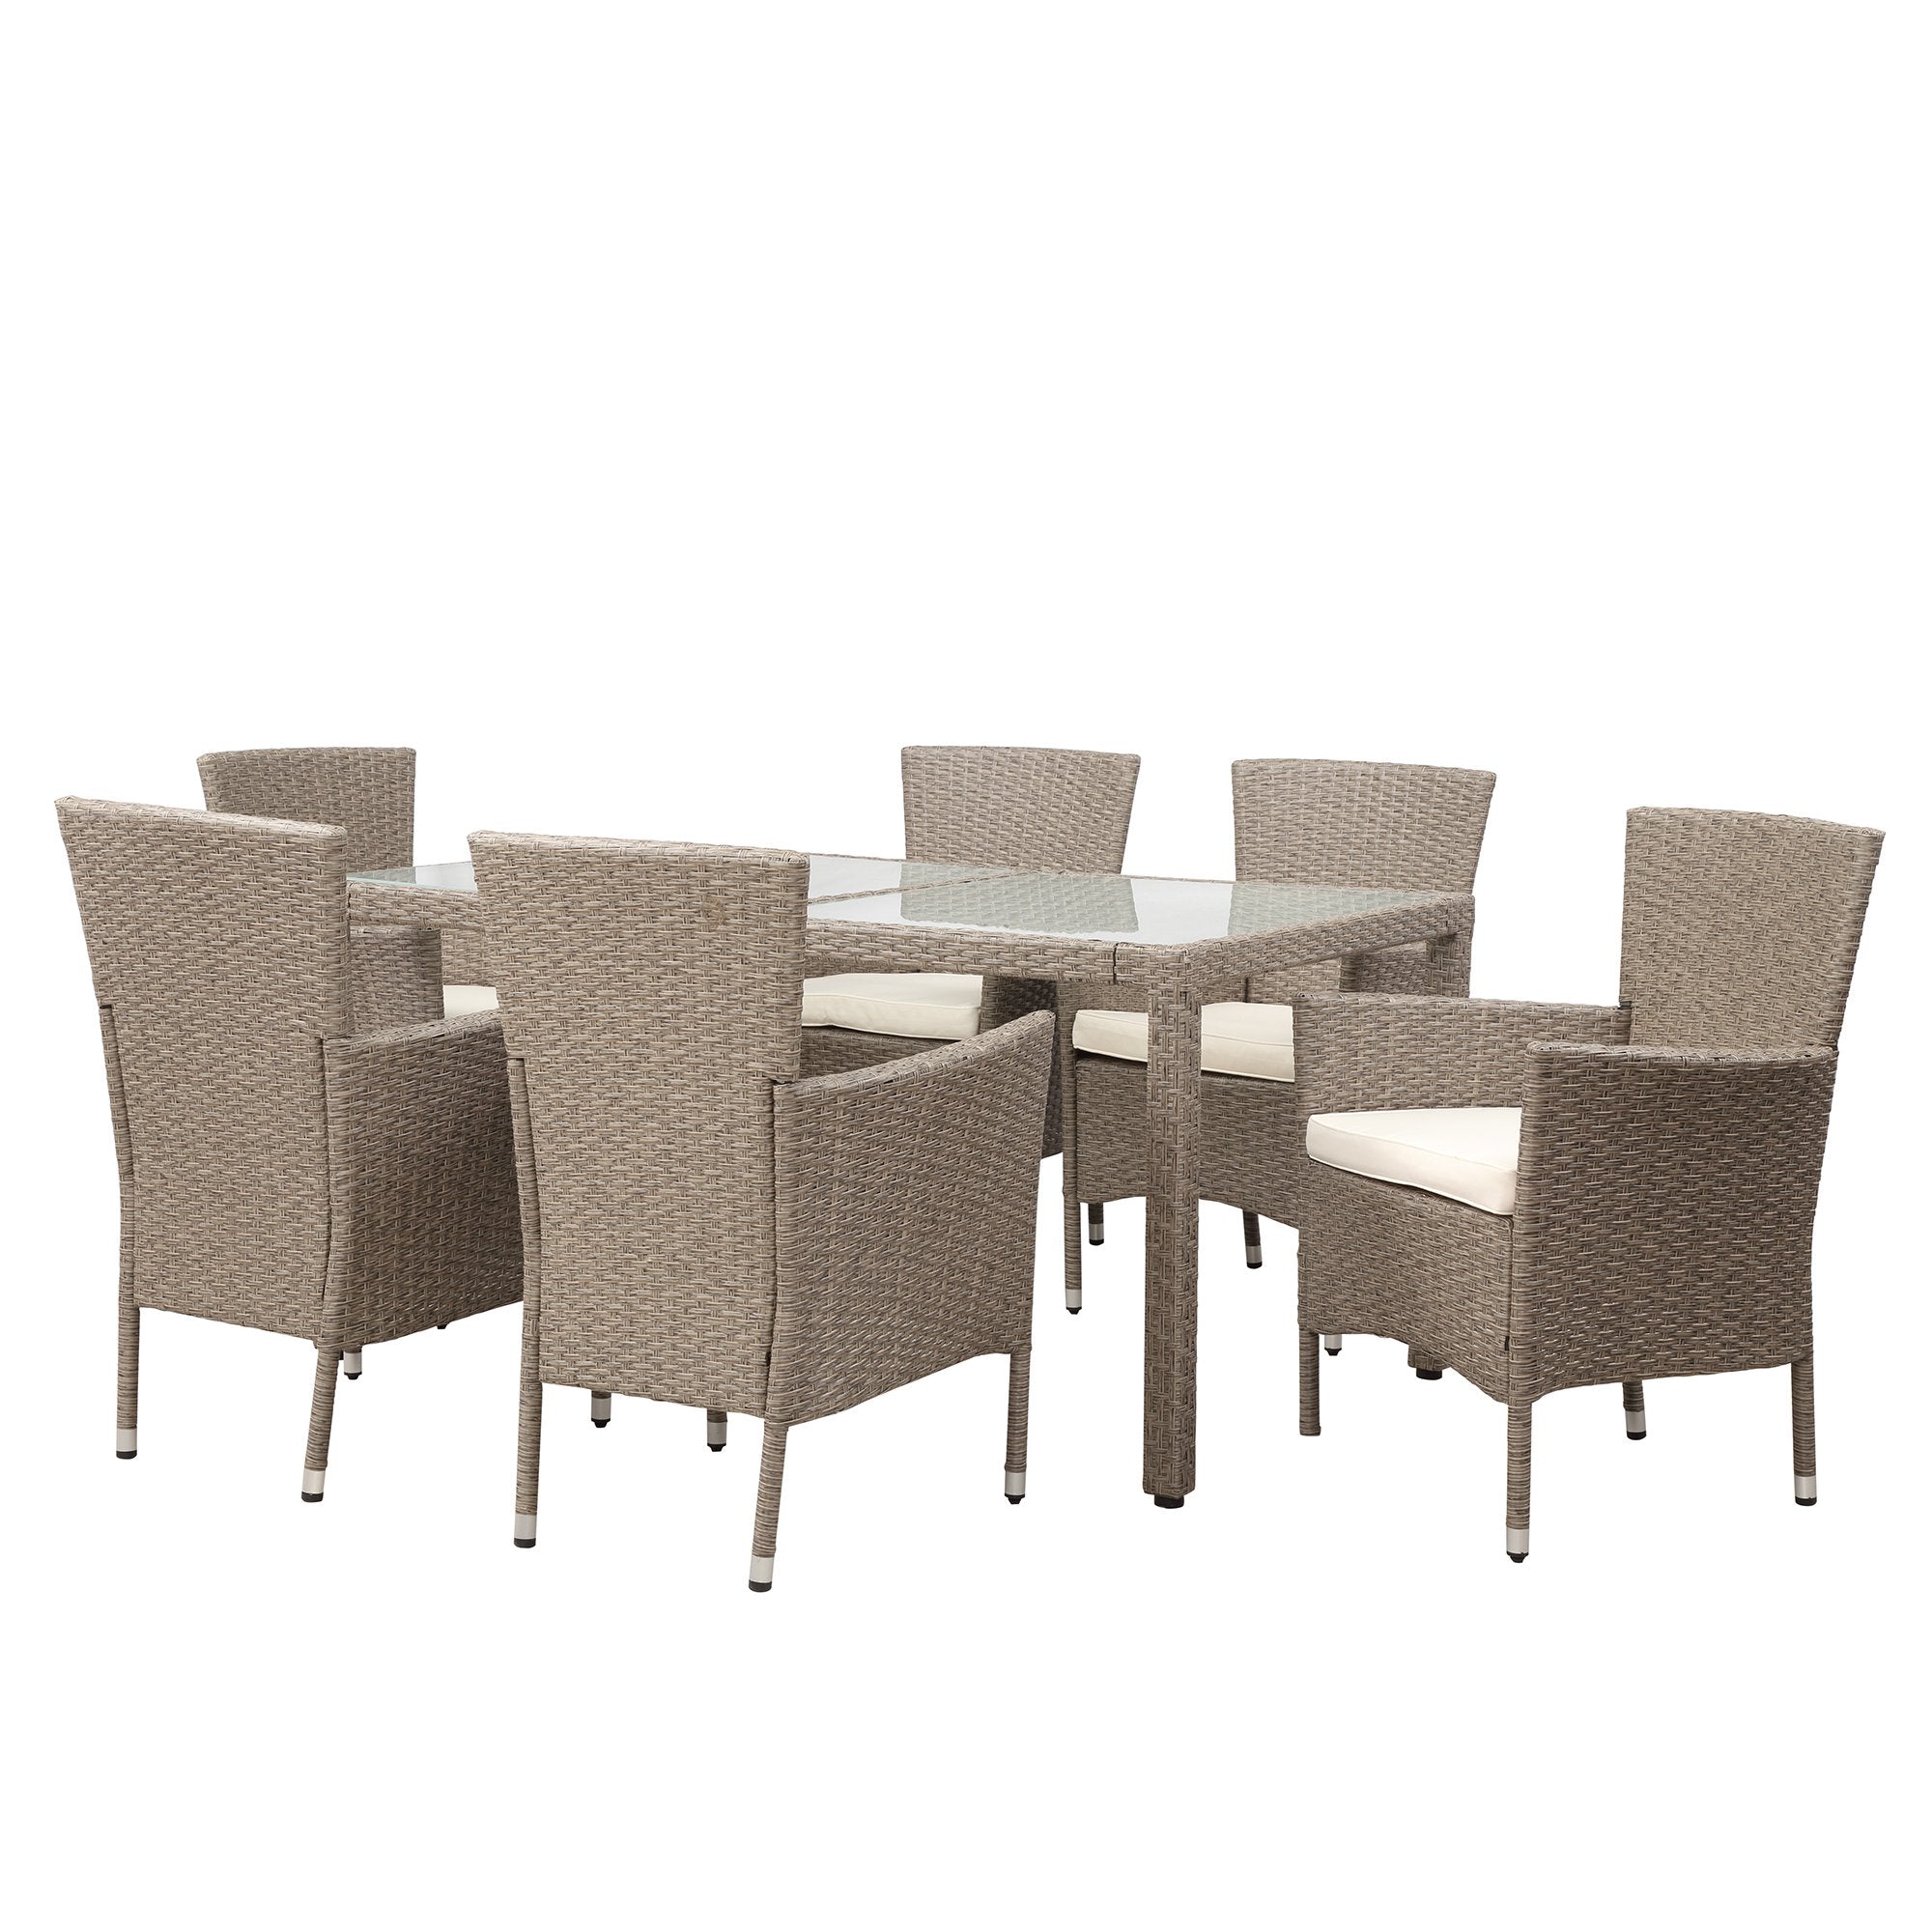 Outdoor Wicker Dining Set, 7 Piece Patio Dinning Table Beige-Brown Wicker Furniture Seating (Beige Cushions)-Boyel Living